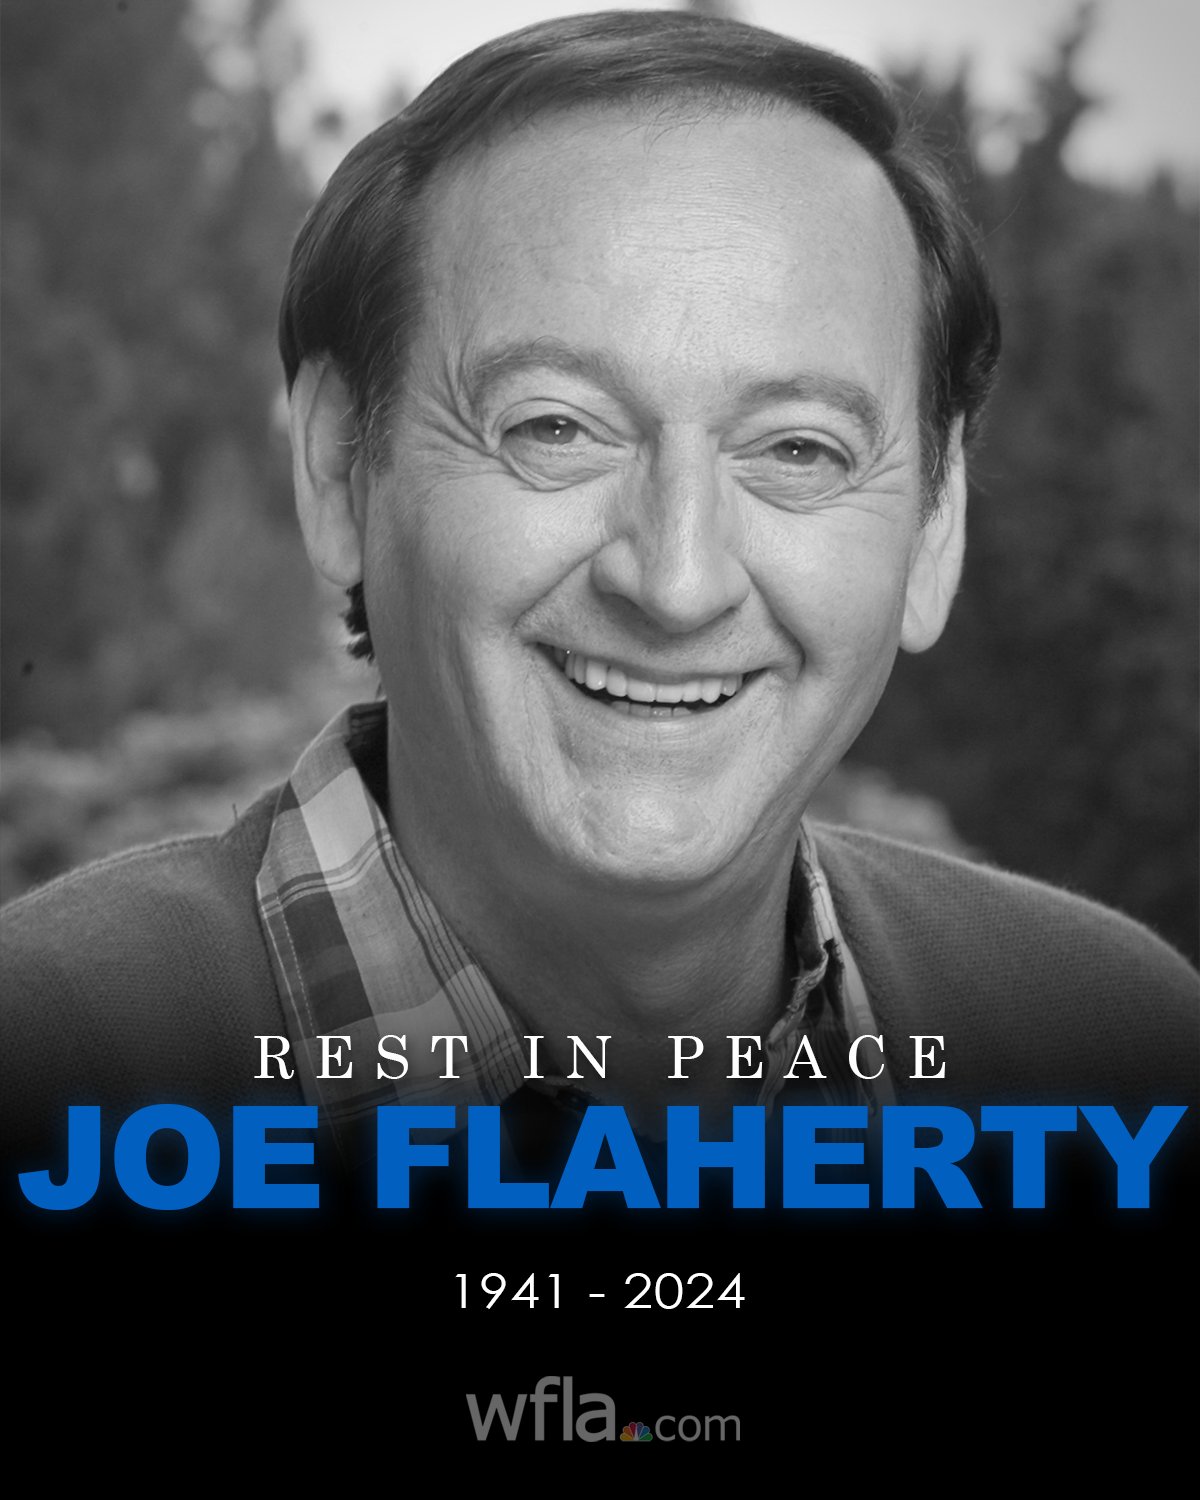 WFLA NEWS on X: "REST IN PEACE: Comedian Joe Flaherty, known for his roles  in 'Happy Gilmore' and 'Freaks and Geeks,' has died at age 82. STORY:  https://t.co/mNy32vrQbz https://t.co/4tyfi20hG0" / X